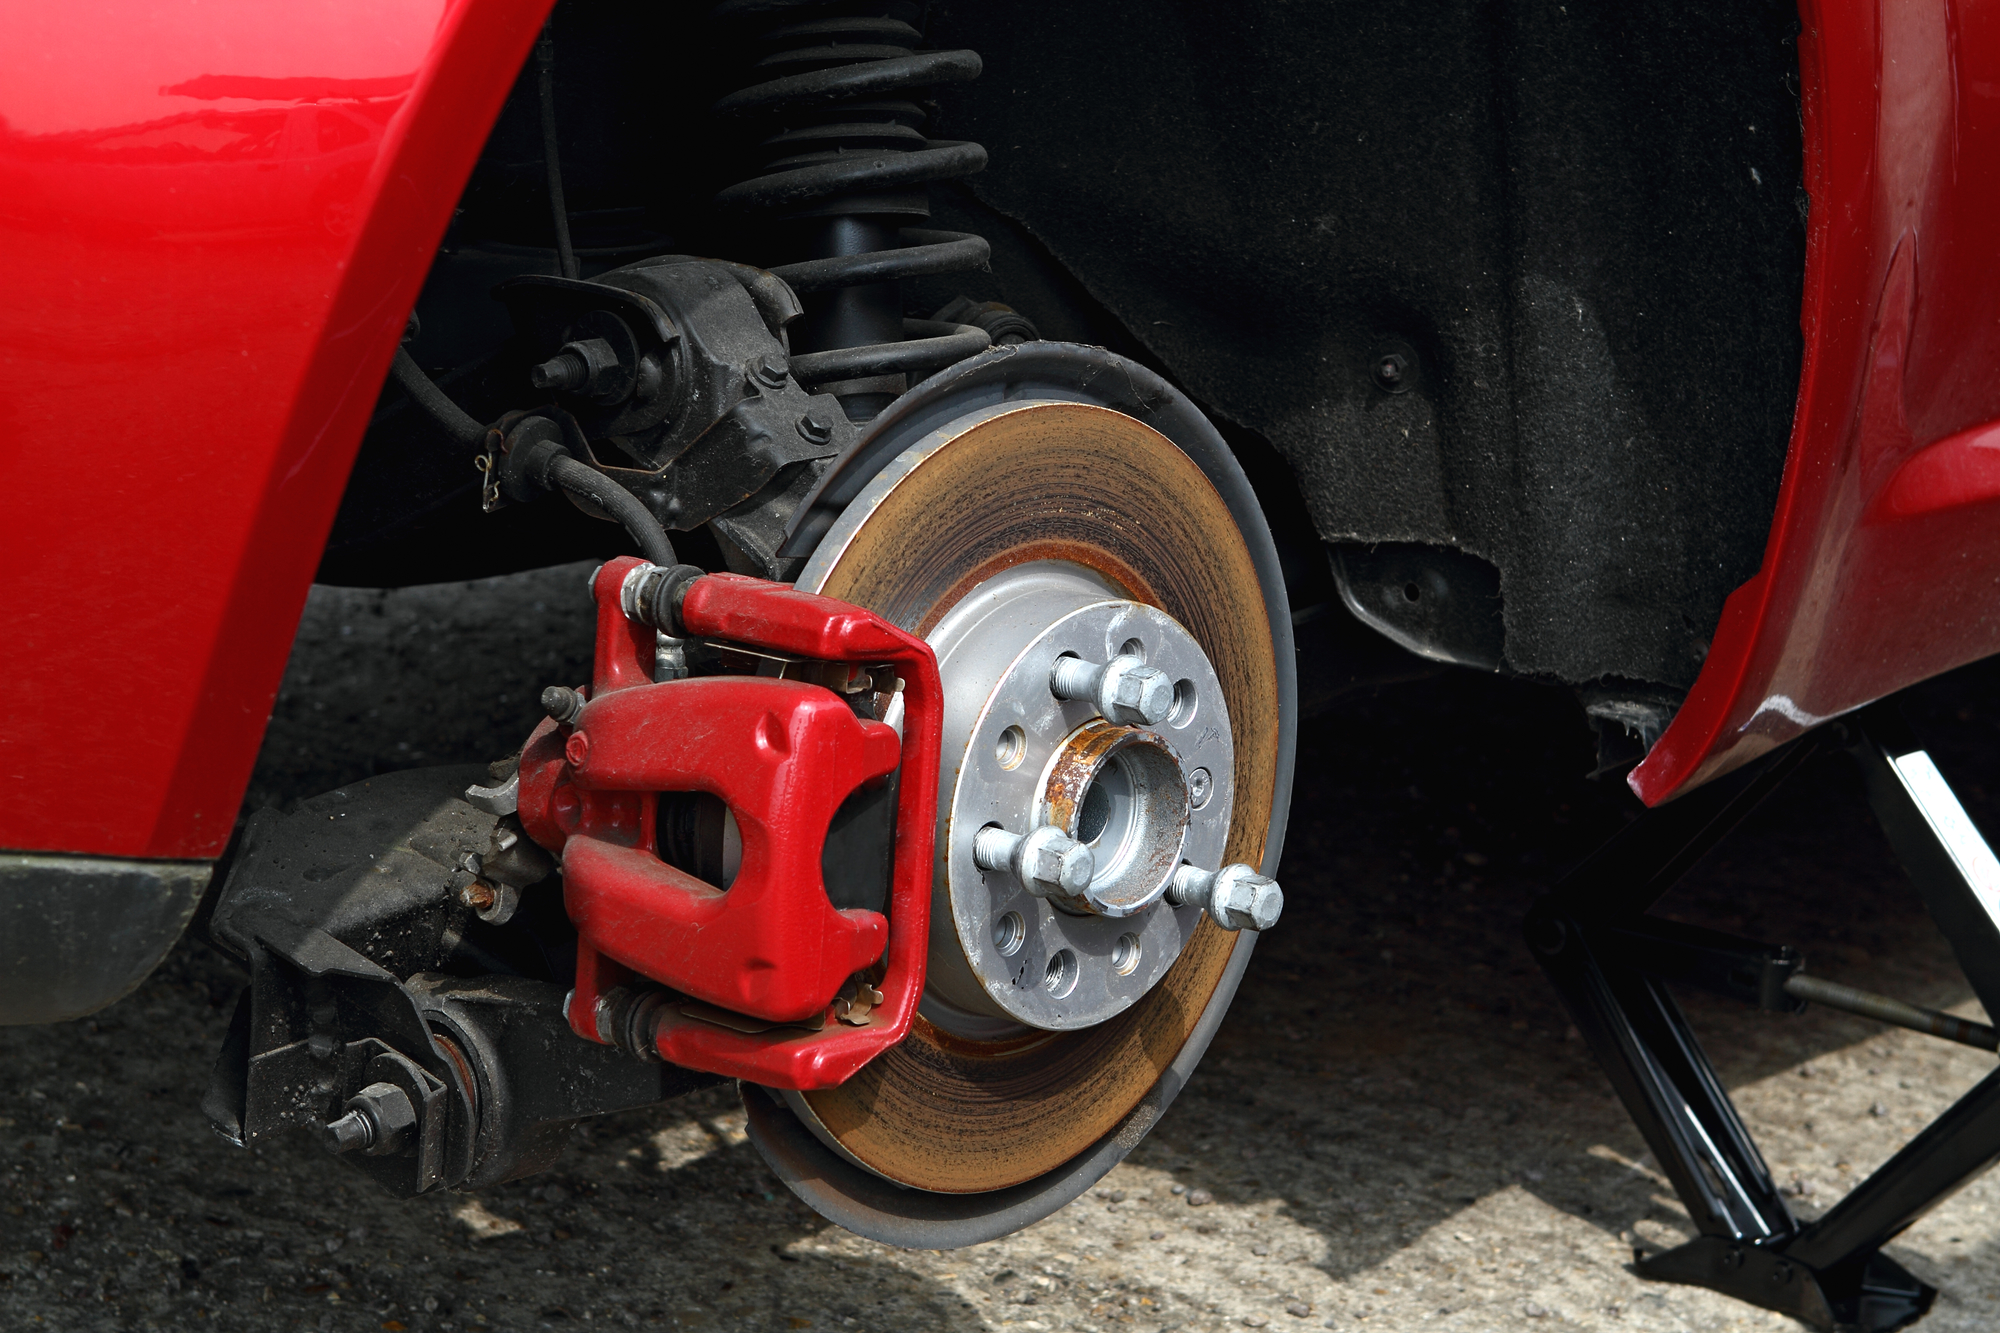 Brake Servicing – It’s Time to Get Your Brakes Checked